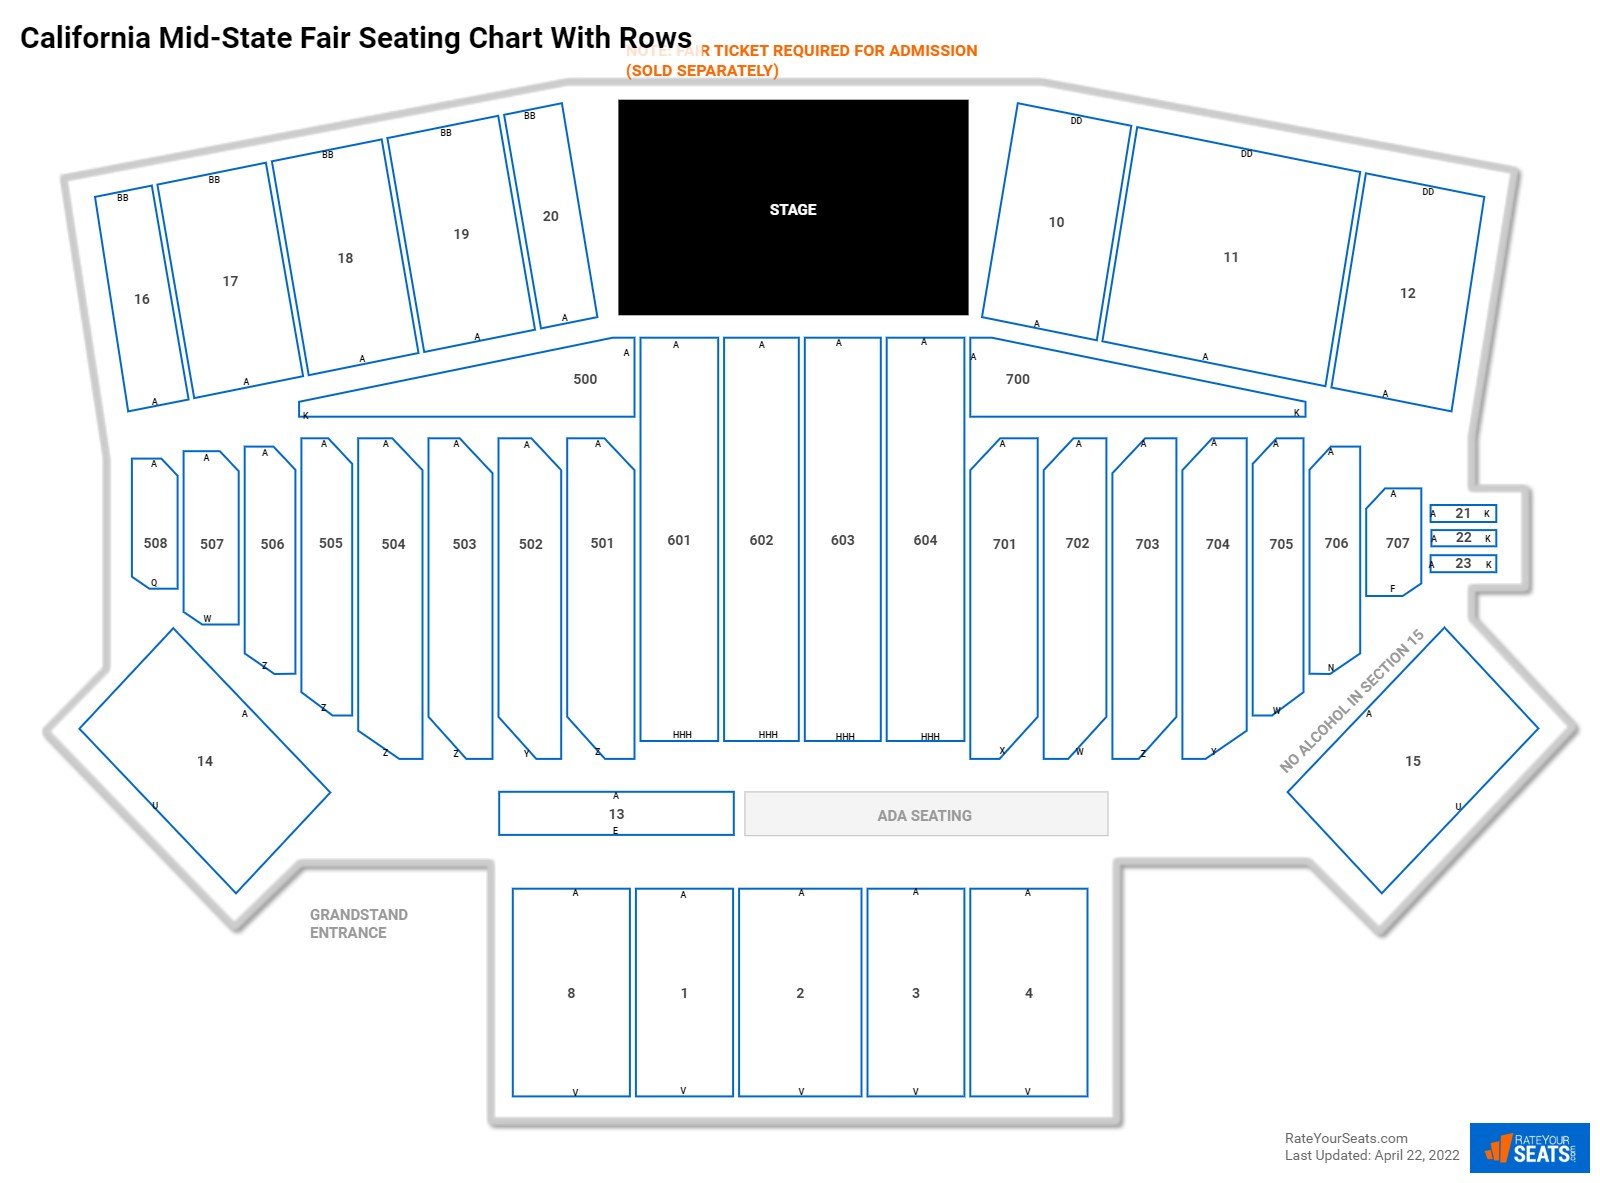 California Mid-State Fair seating chart with row numbers